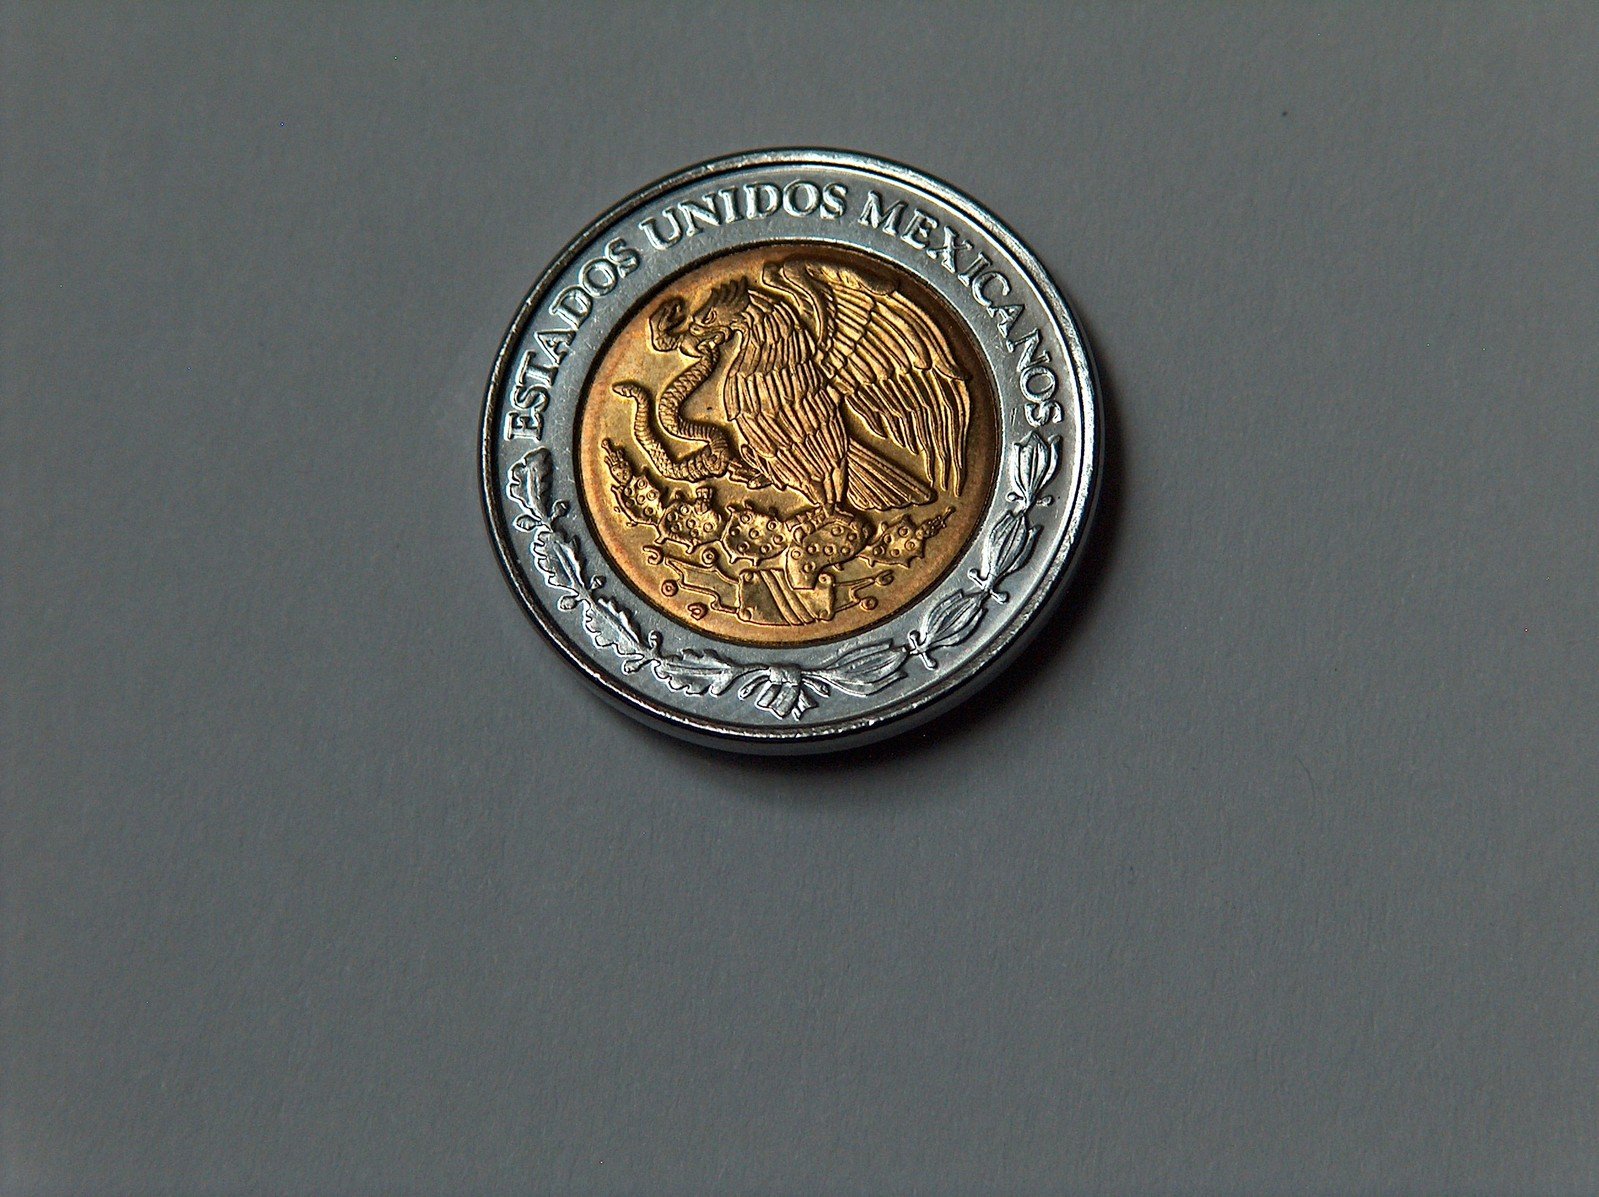 a canadian 1 cent gold coin is shown in front of a gray background